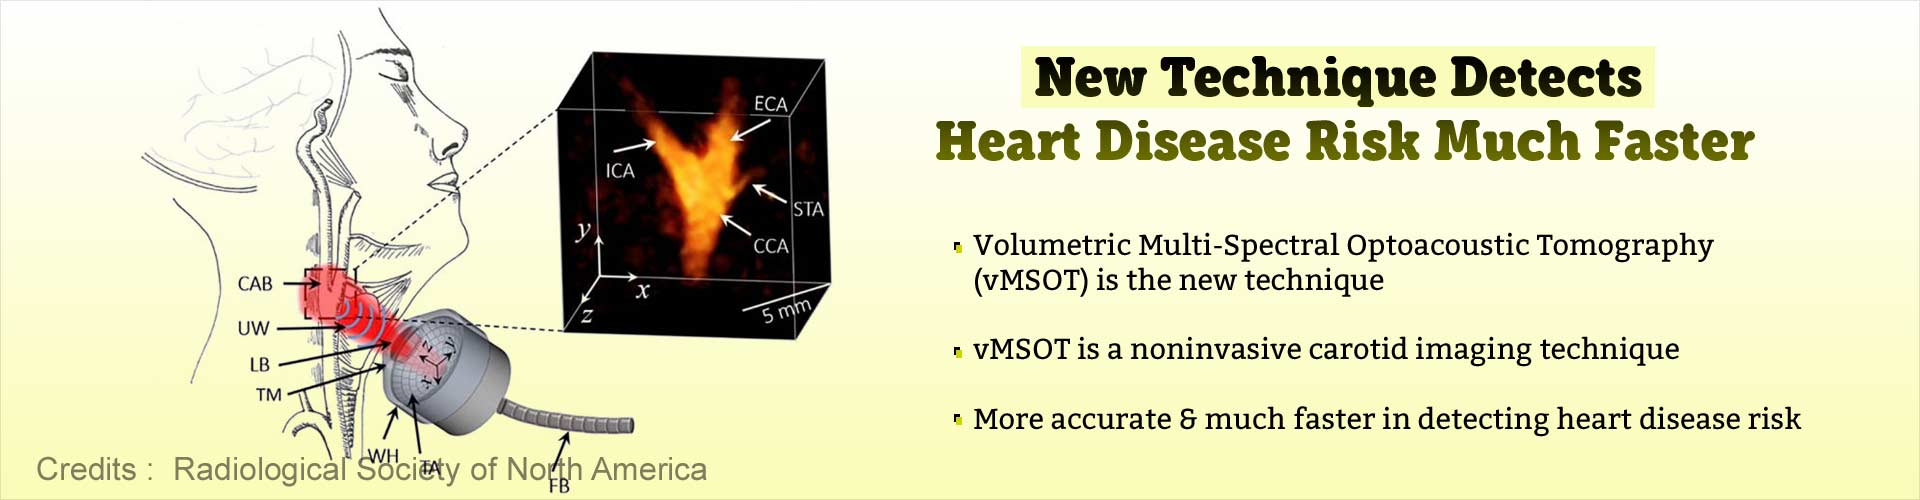 New technique detects heart disease risk much faster. Volumetric Multi-Spectral Optoacoustic Tomography (vMSOT) is the new technique. vMSOT is a noninvasive carotid imaging technique. More accurate and much faster in detecting heart disease risk.  